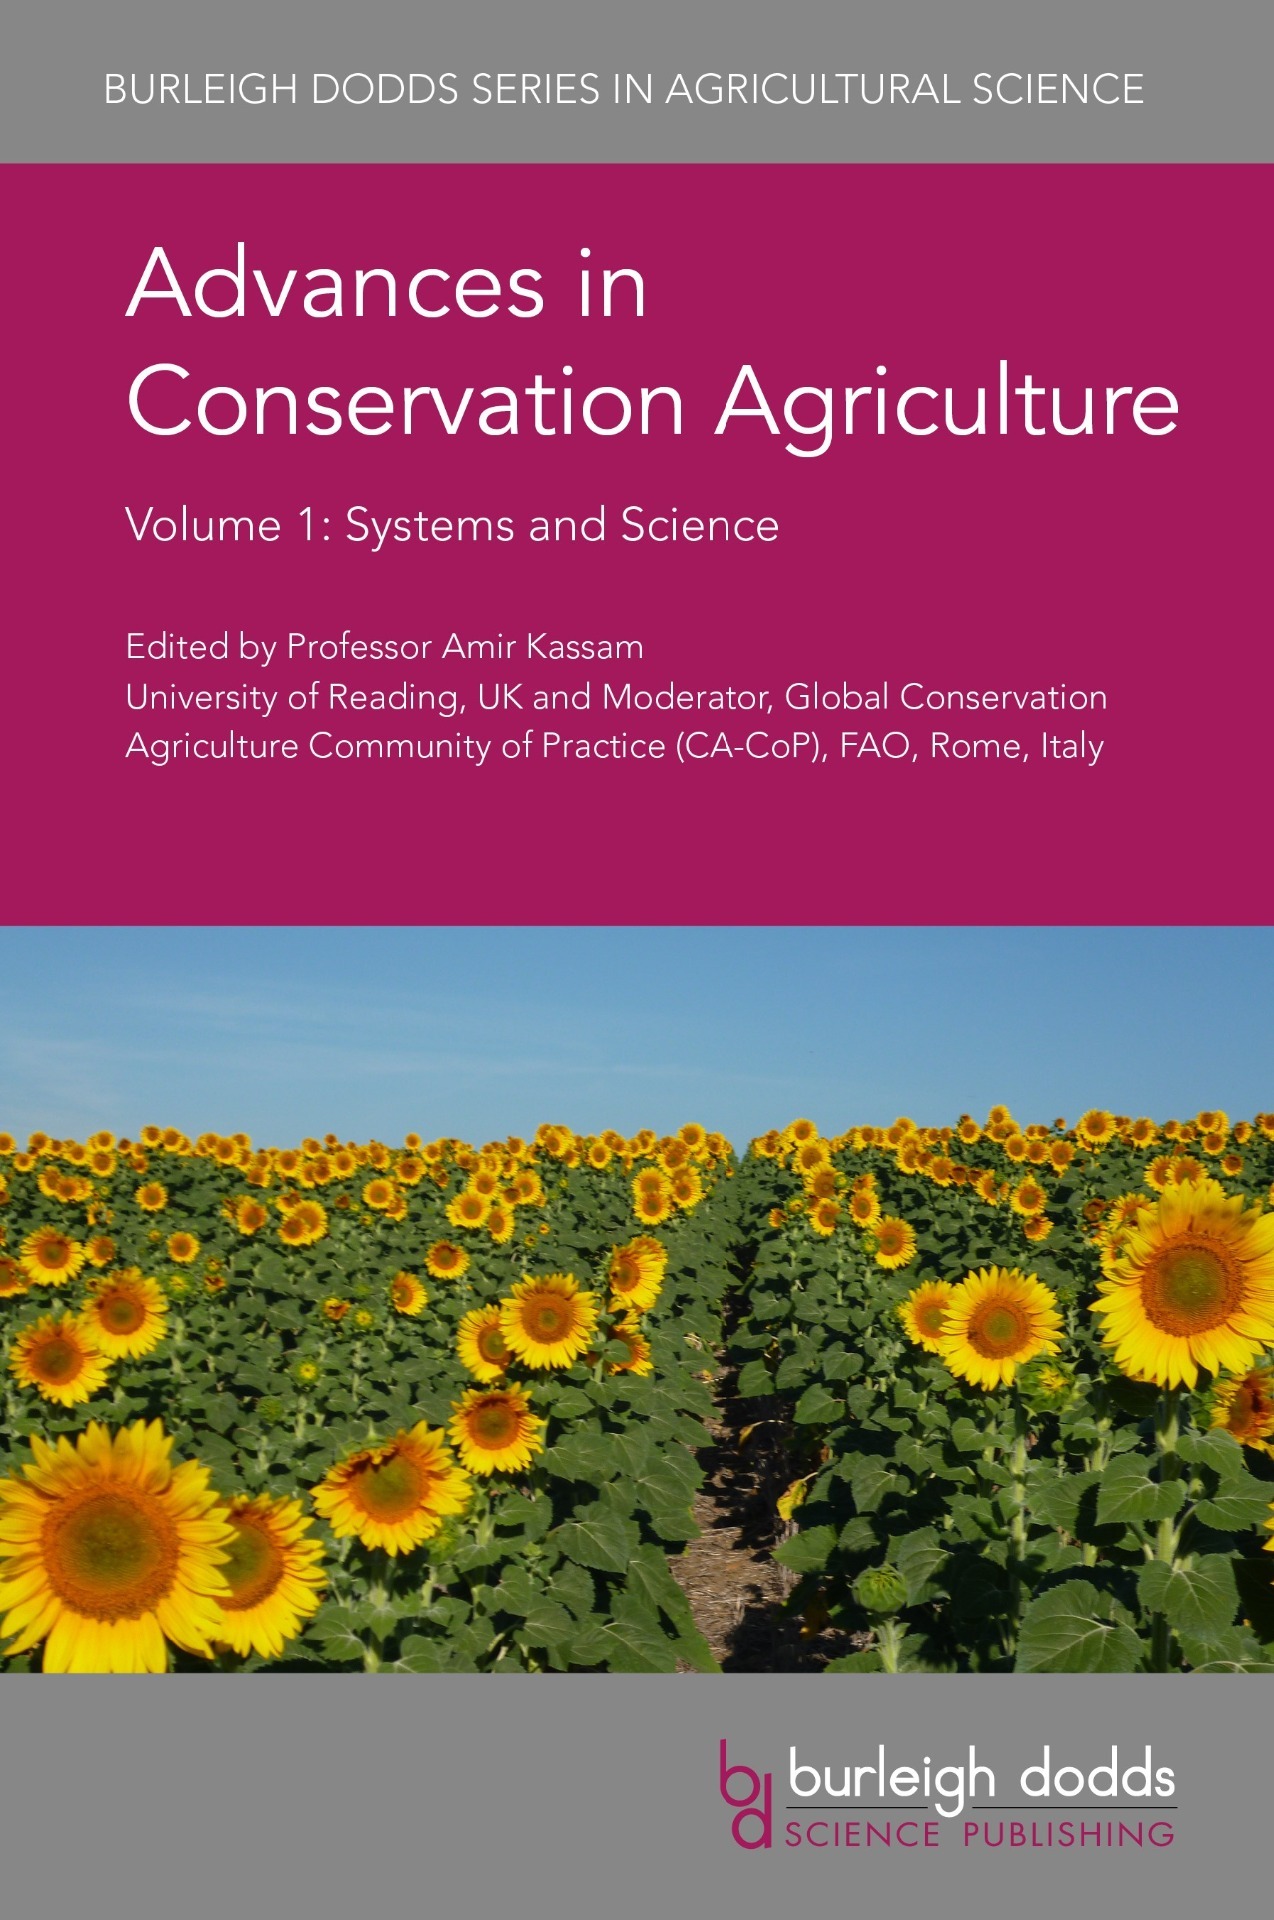 Advances in Conservation Agriculture Vol 1